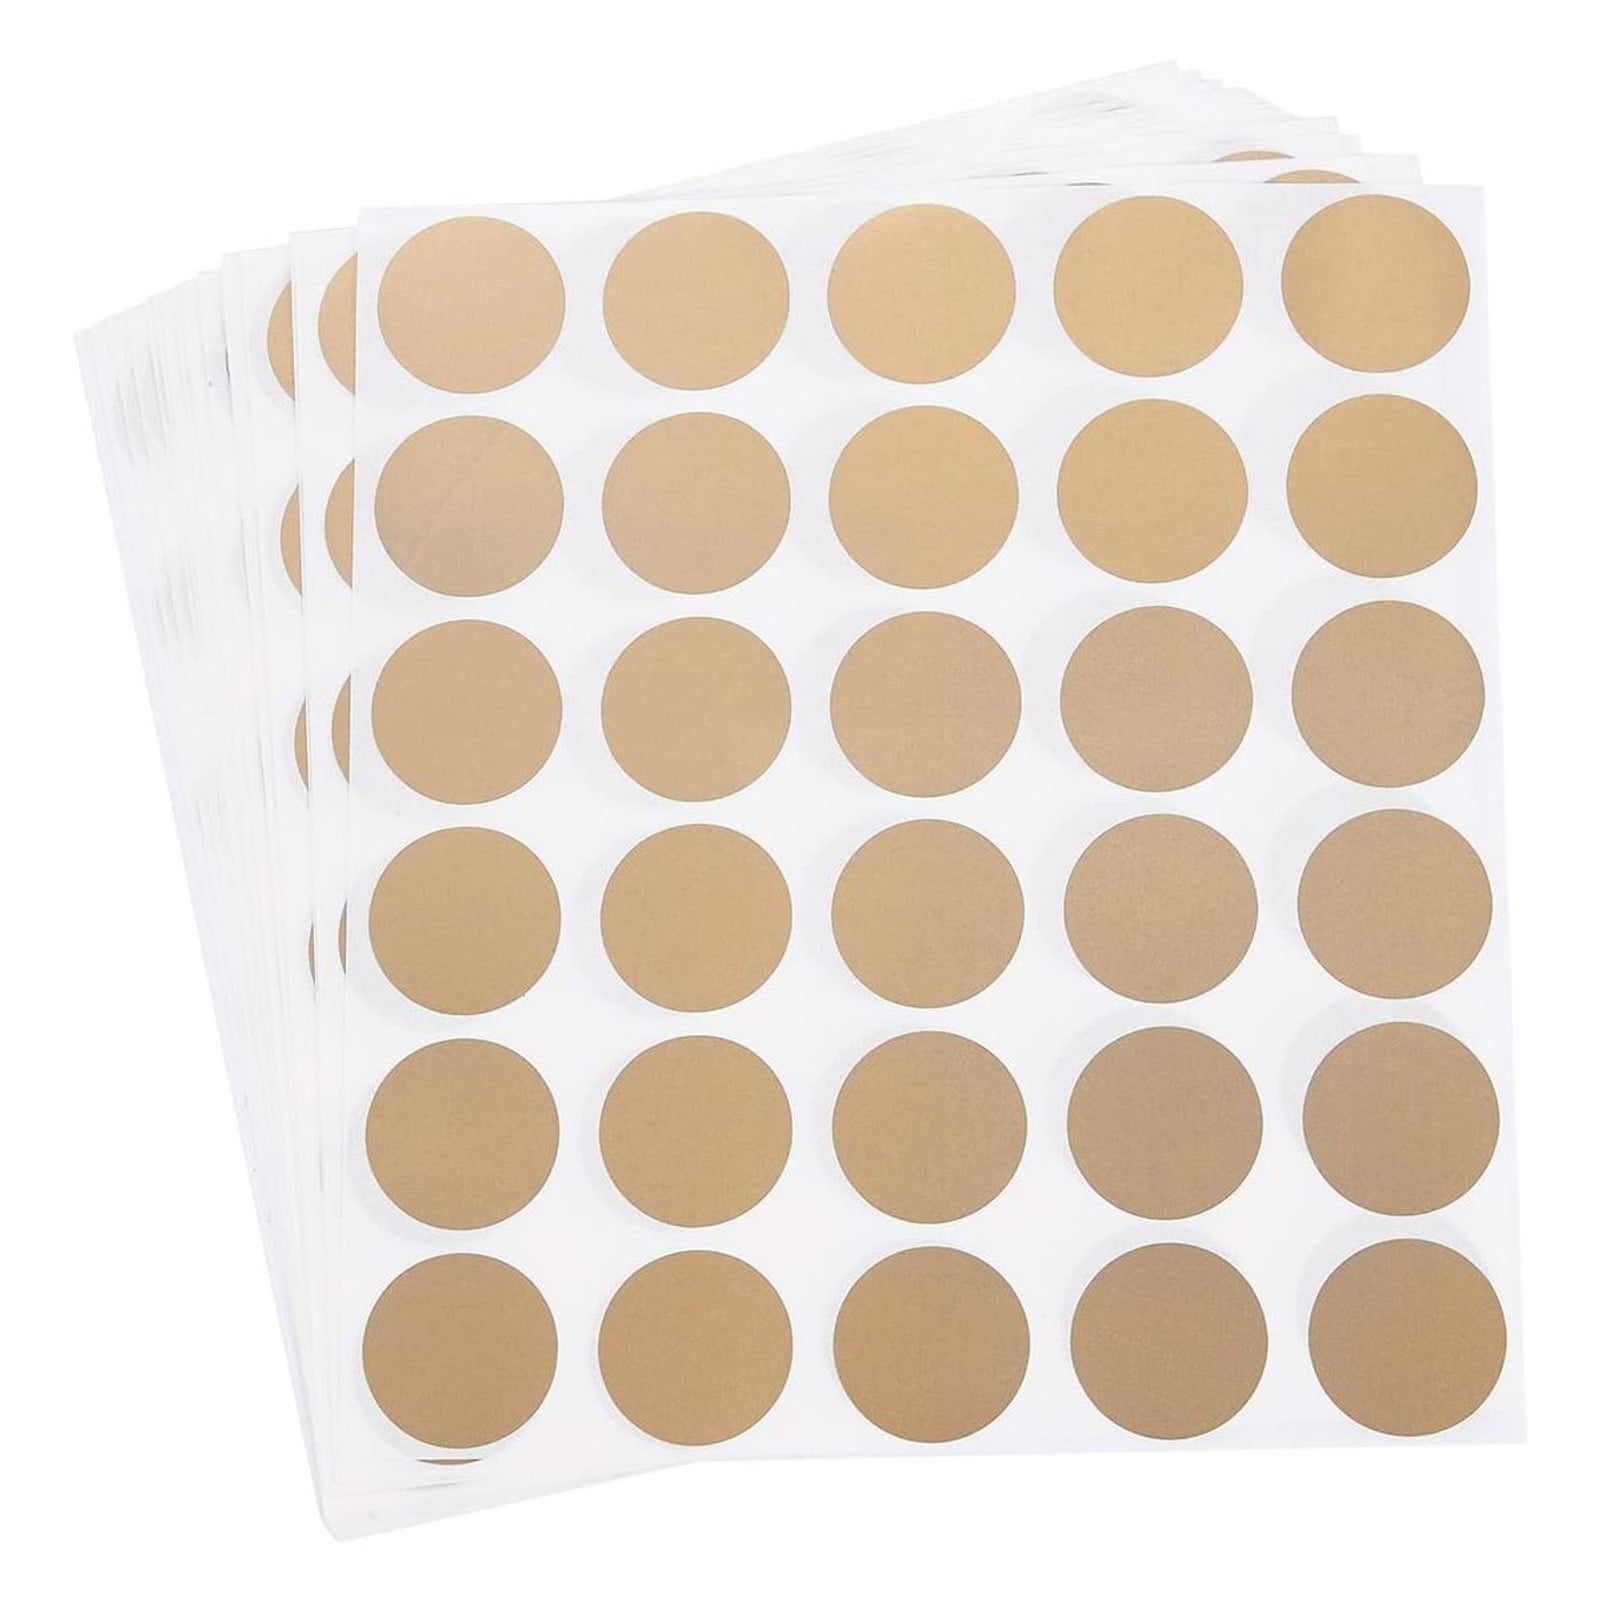 Scratch off Stickers 2inch Gold Silvery Square Round Peel and